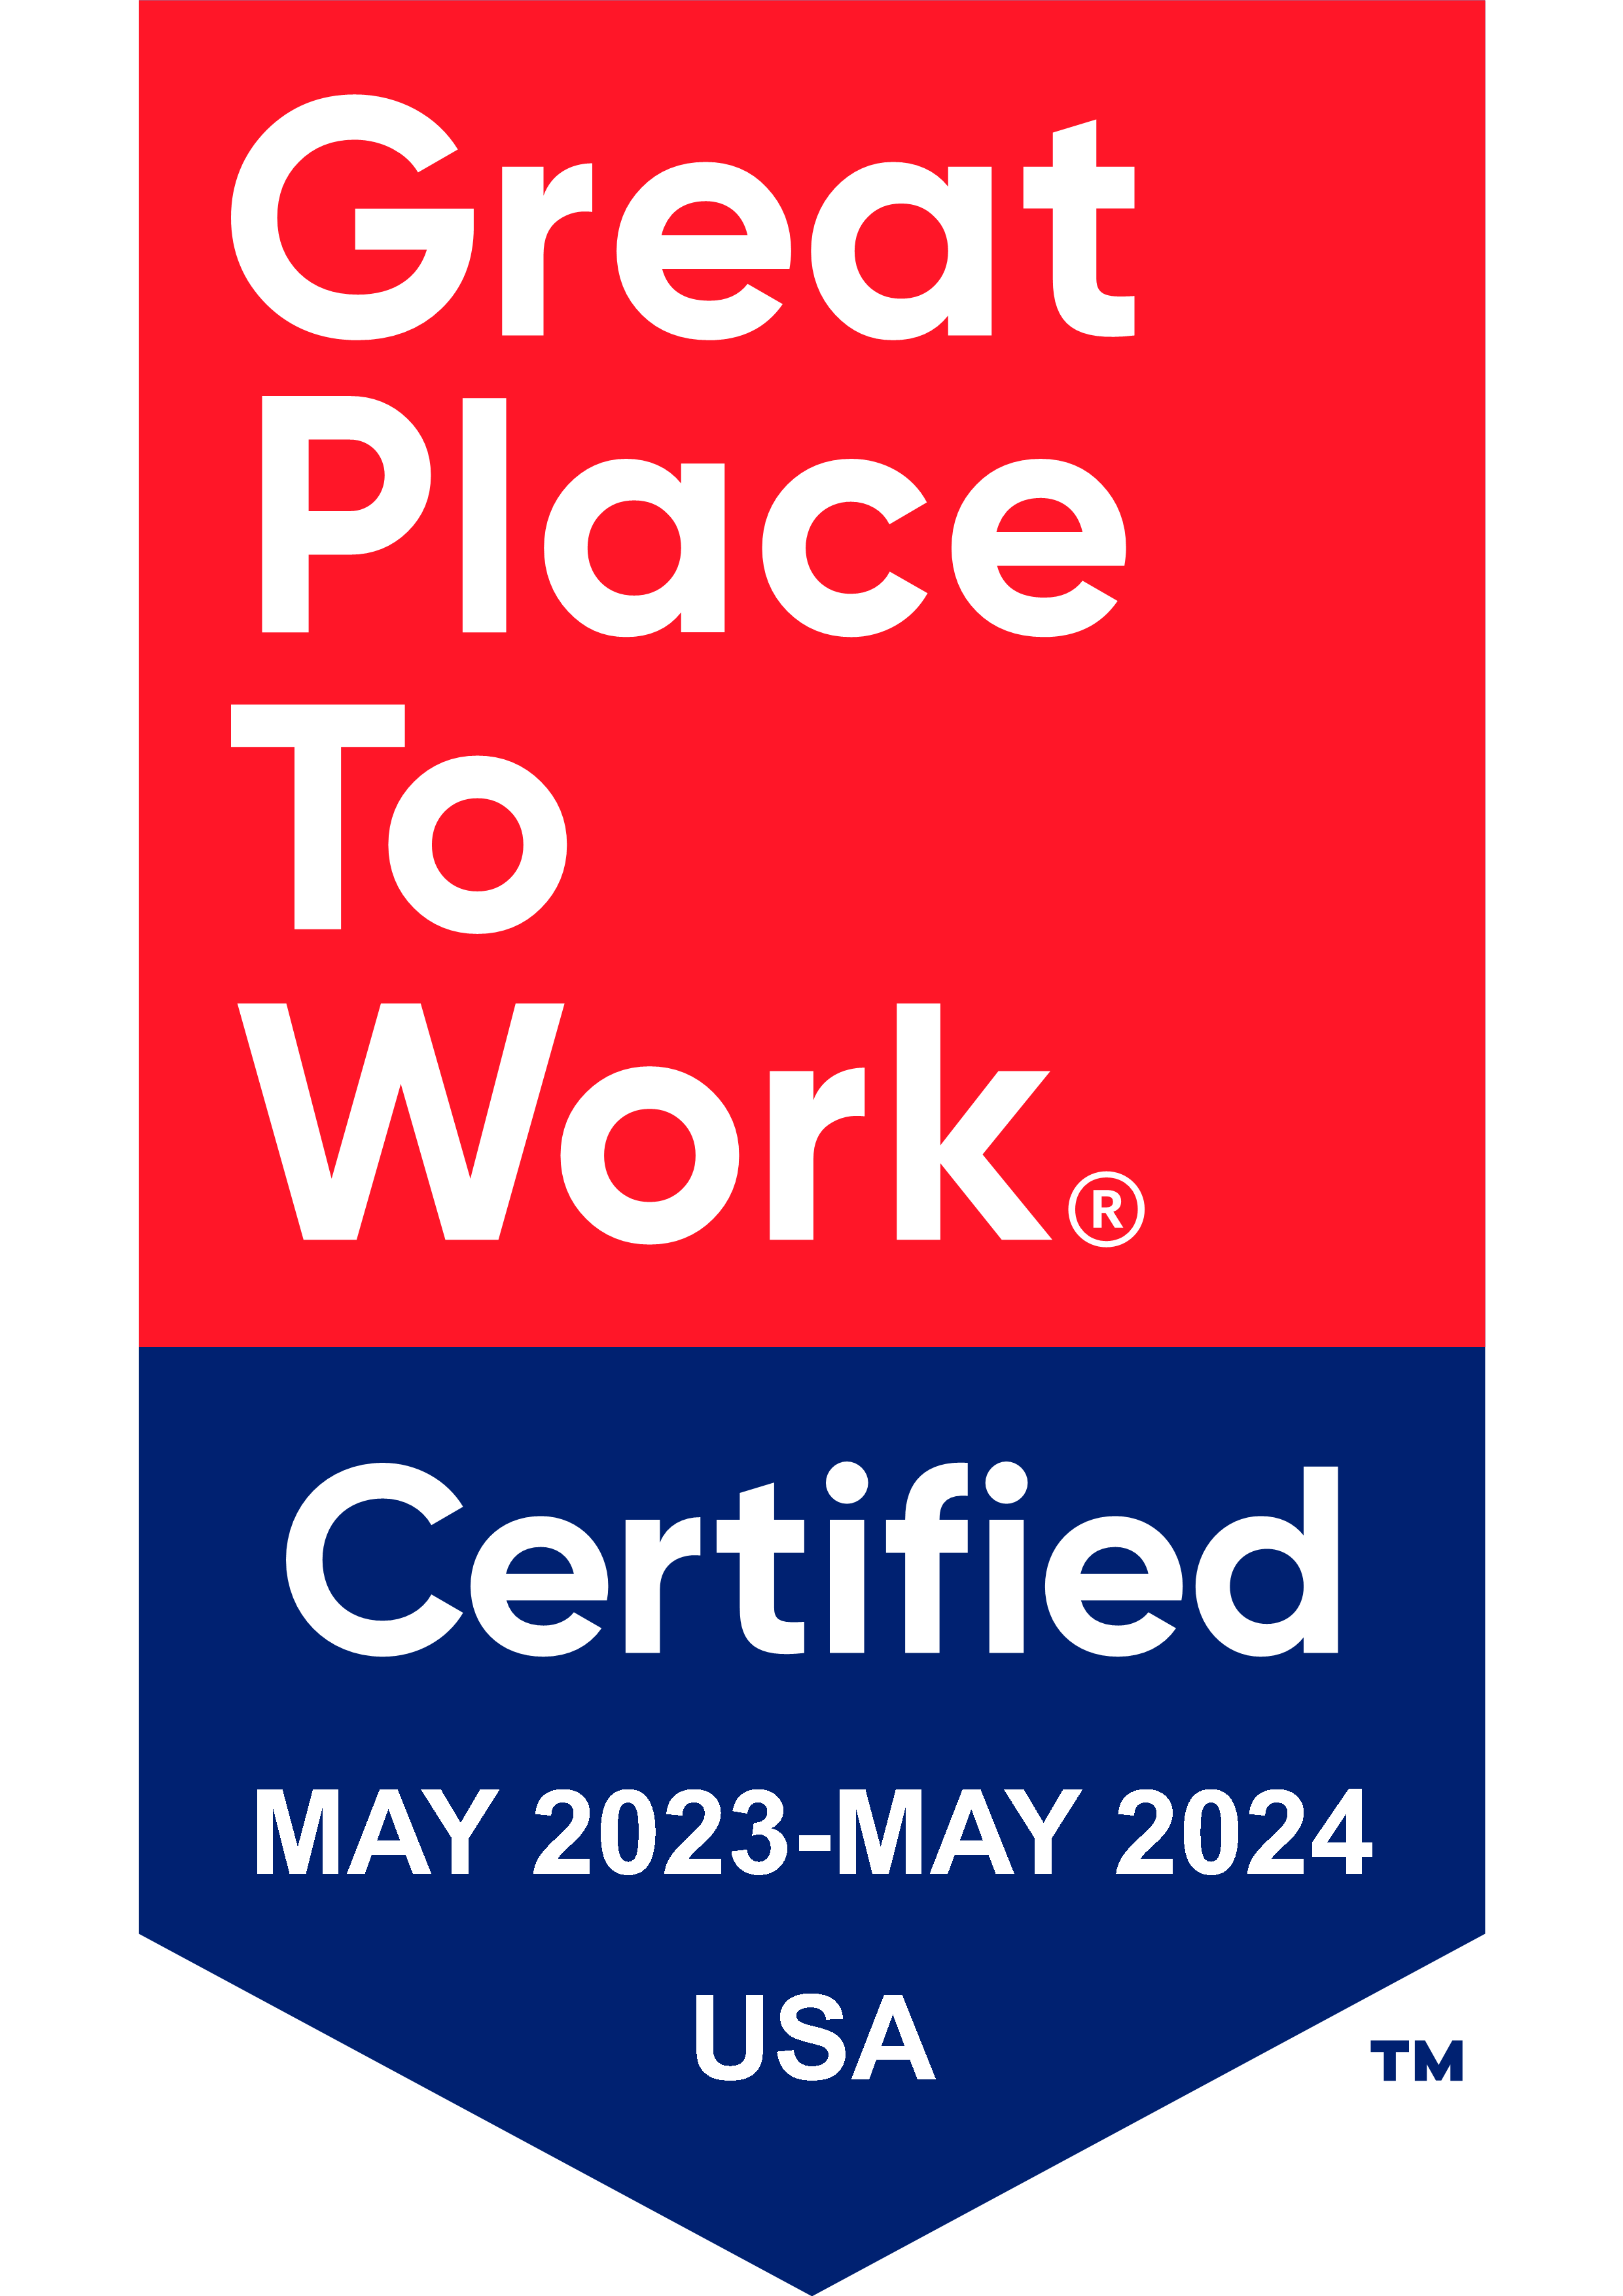 Great Place to Work Certified - May 2023- May 2024